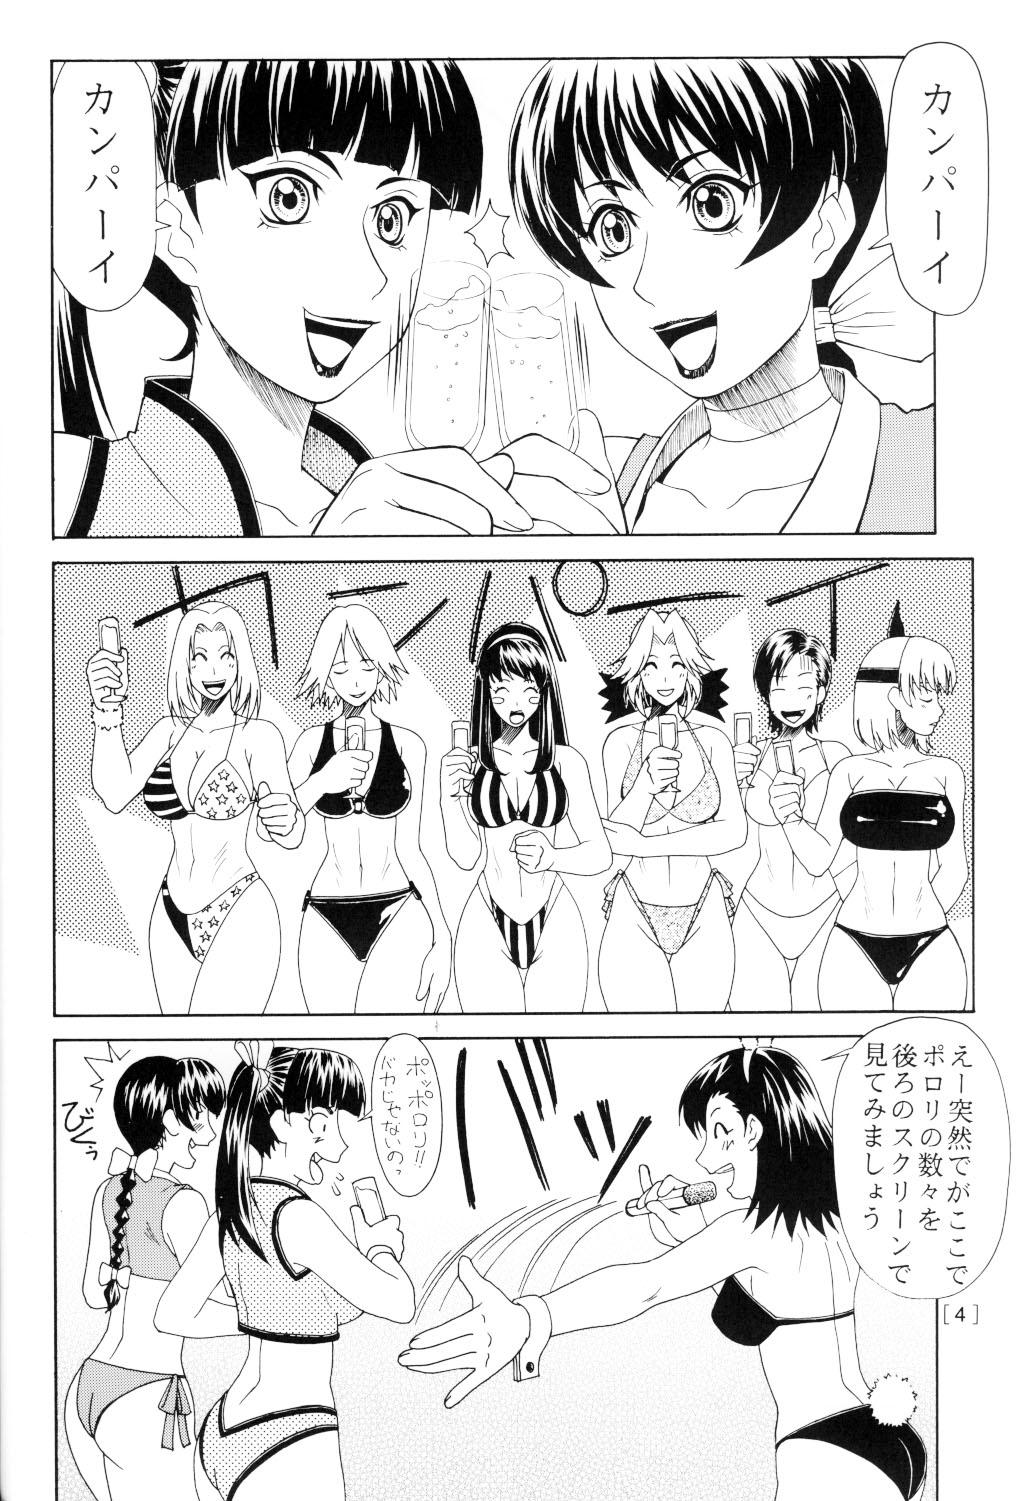 Puto Mikicy Vol. 2 - Dead or alive Ace attorney Boy Girl - Page 5